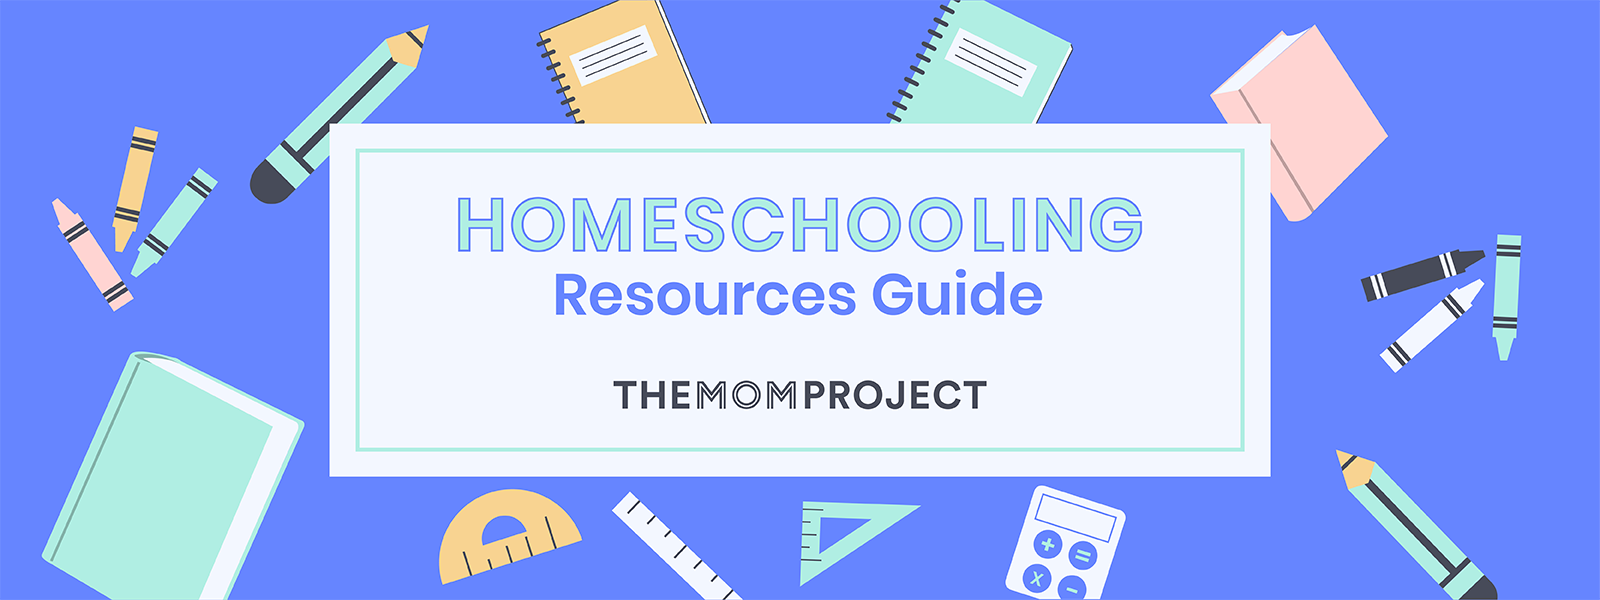 Homeschooling Resources Guide